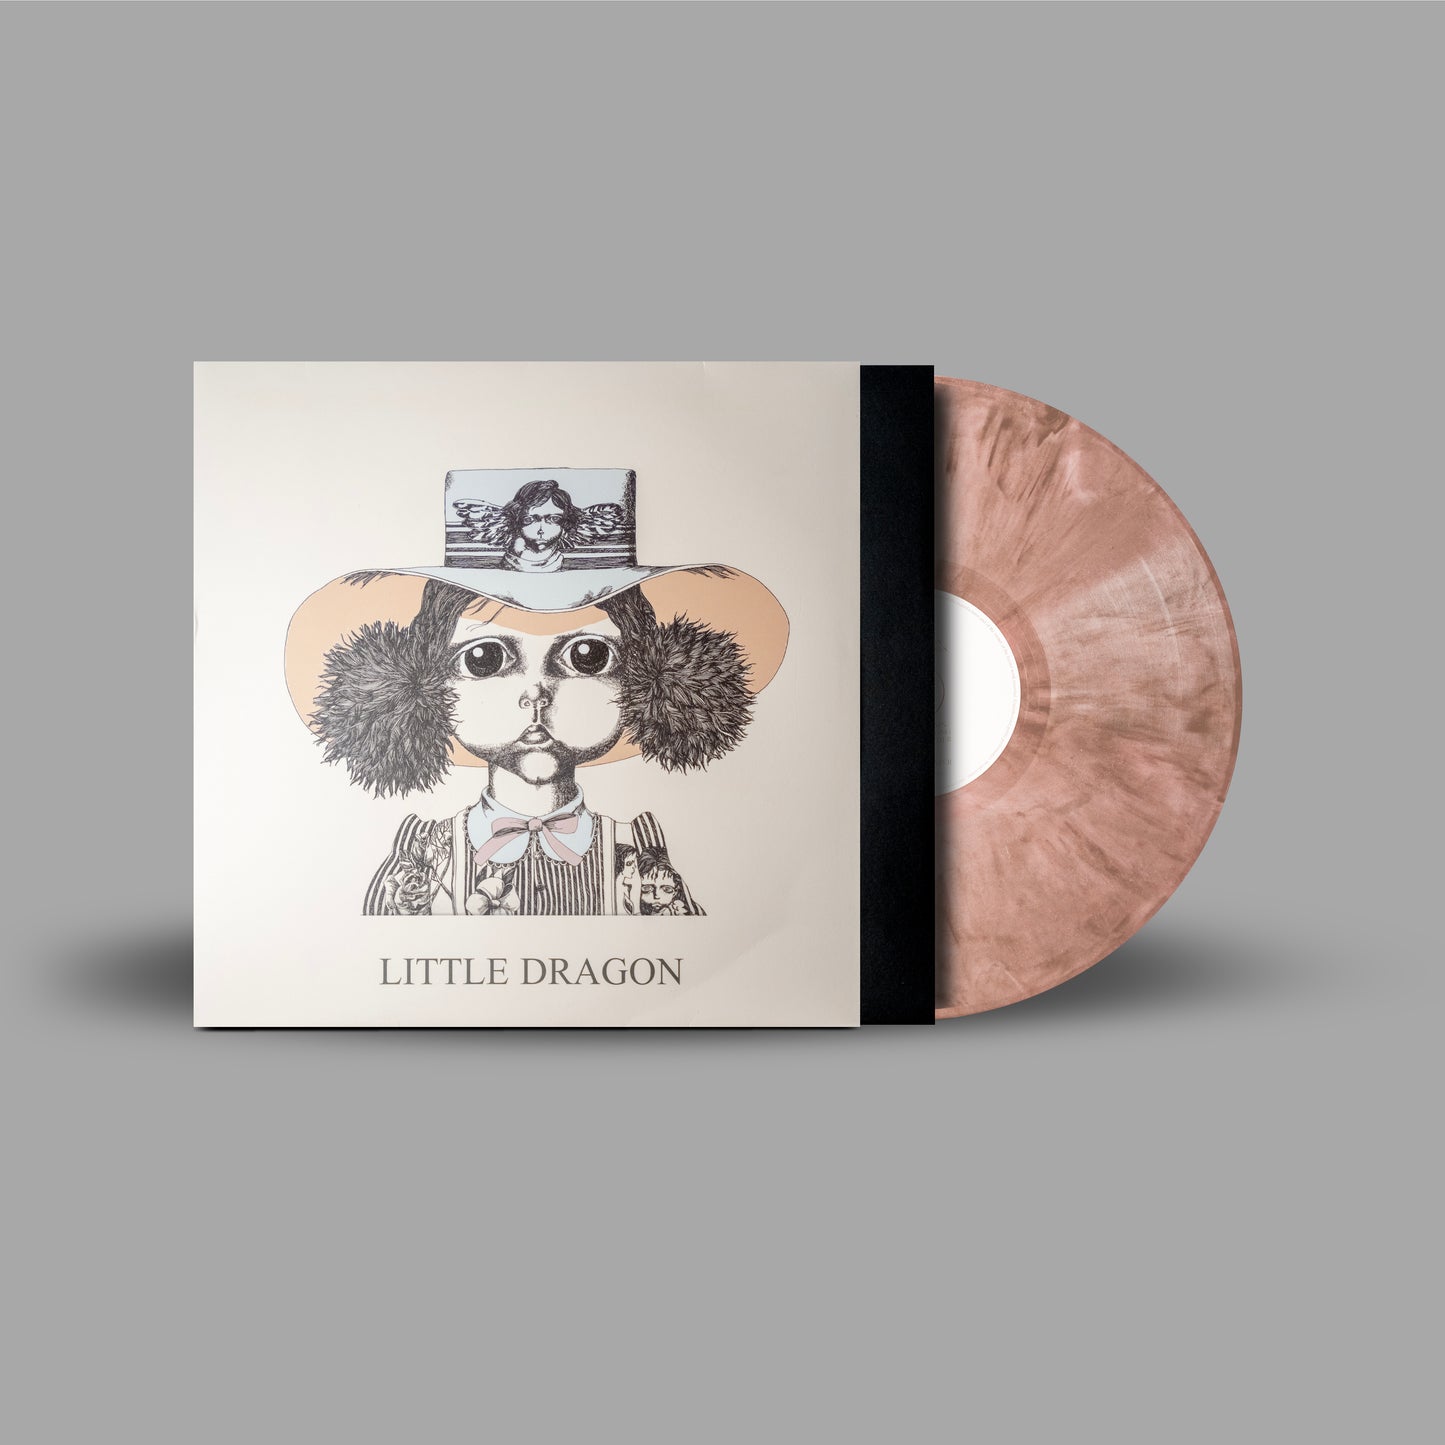 Little Dragon (Dirty Pink Limited Edition)